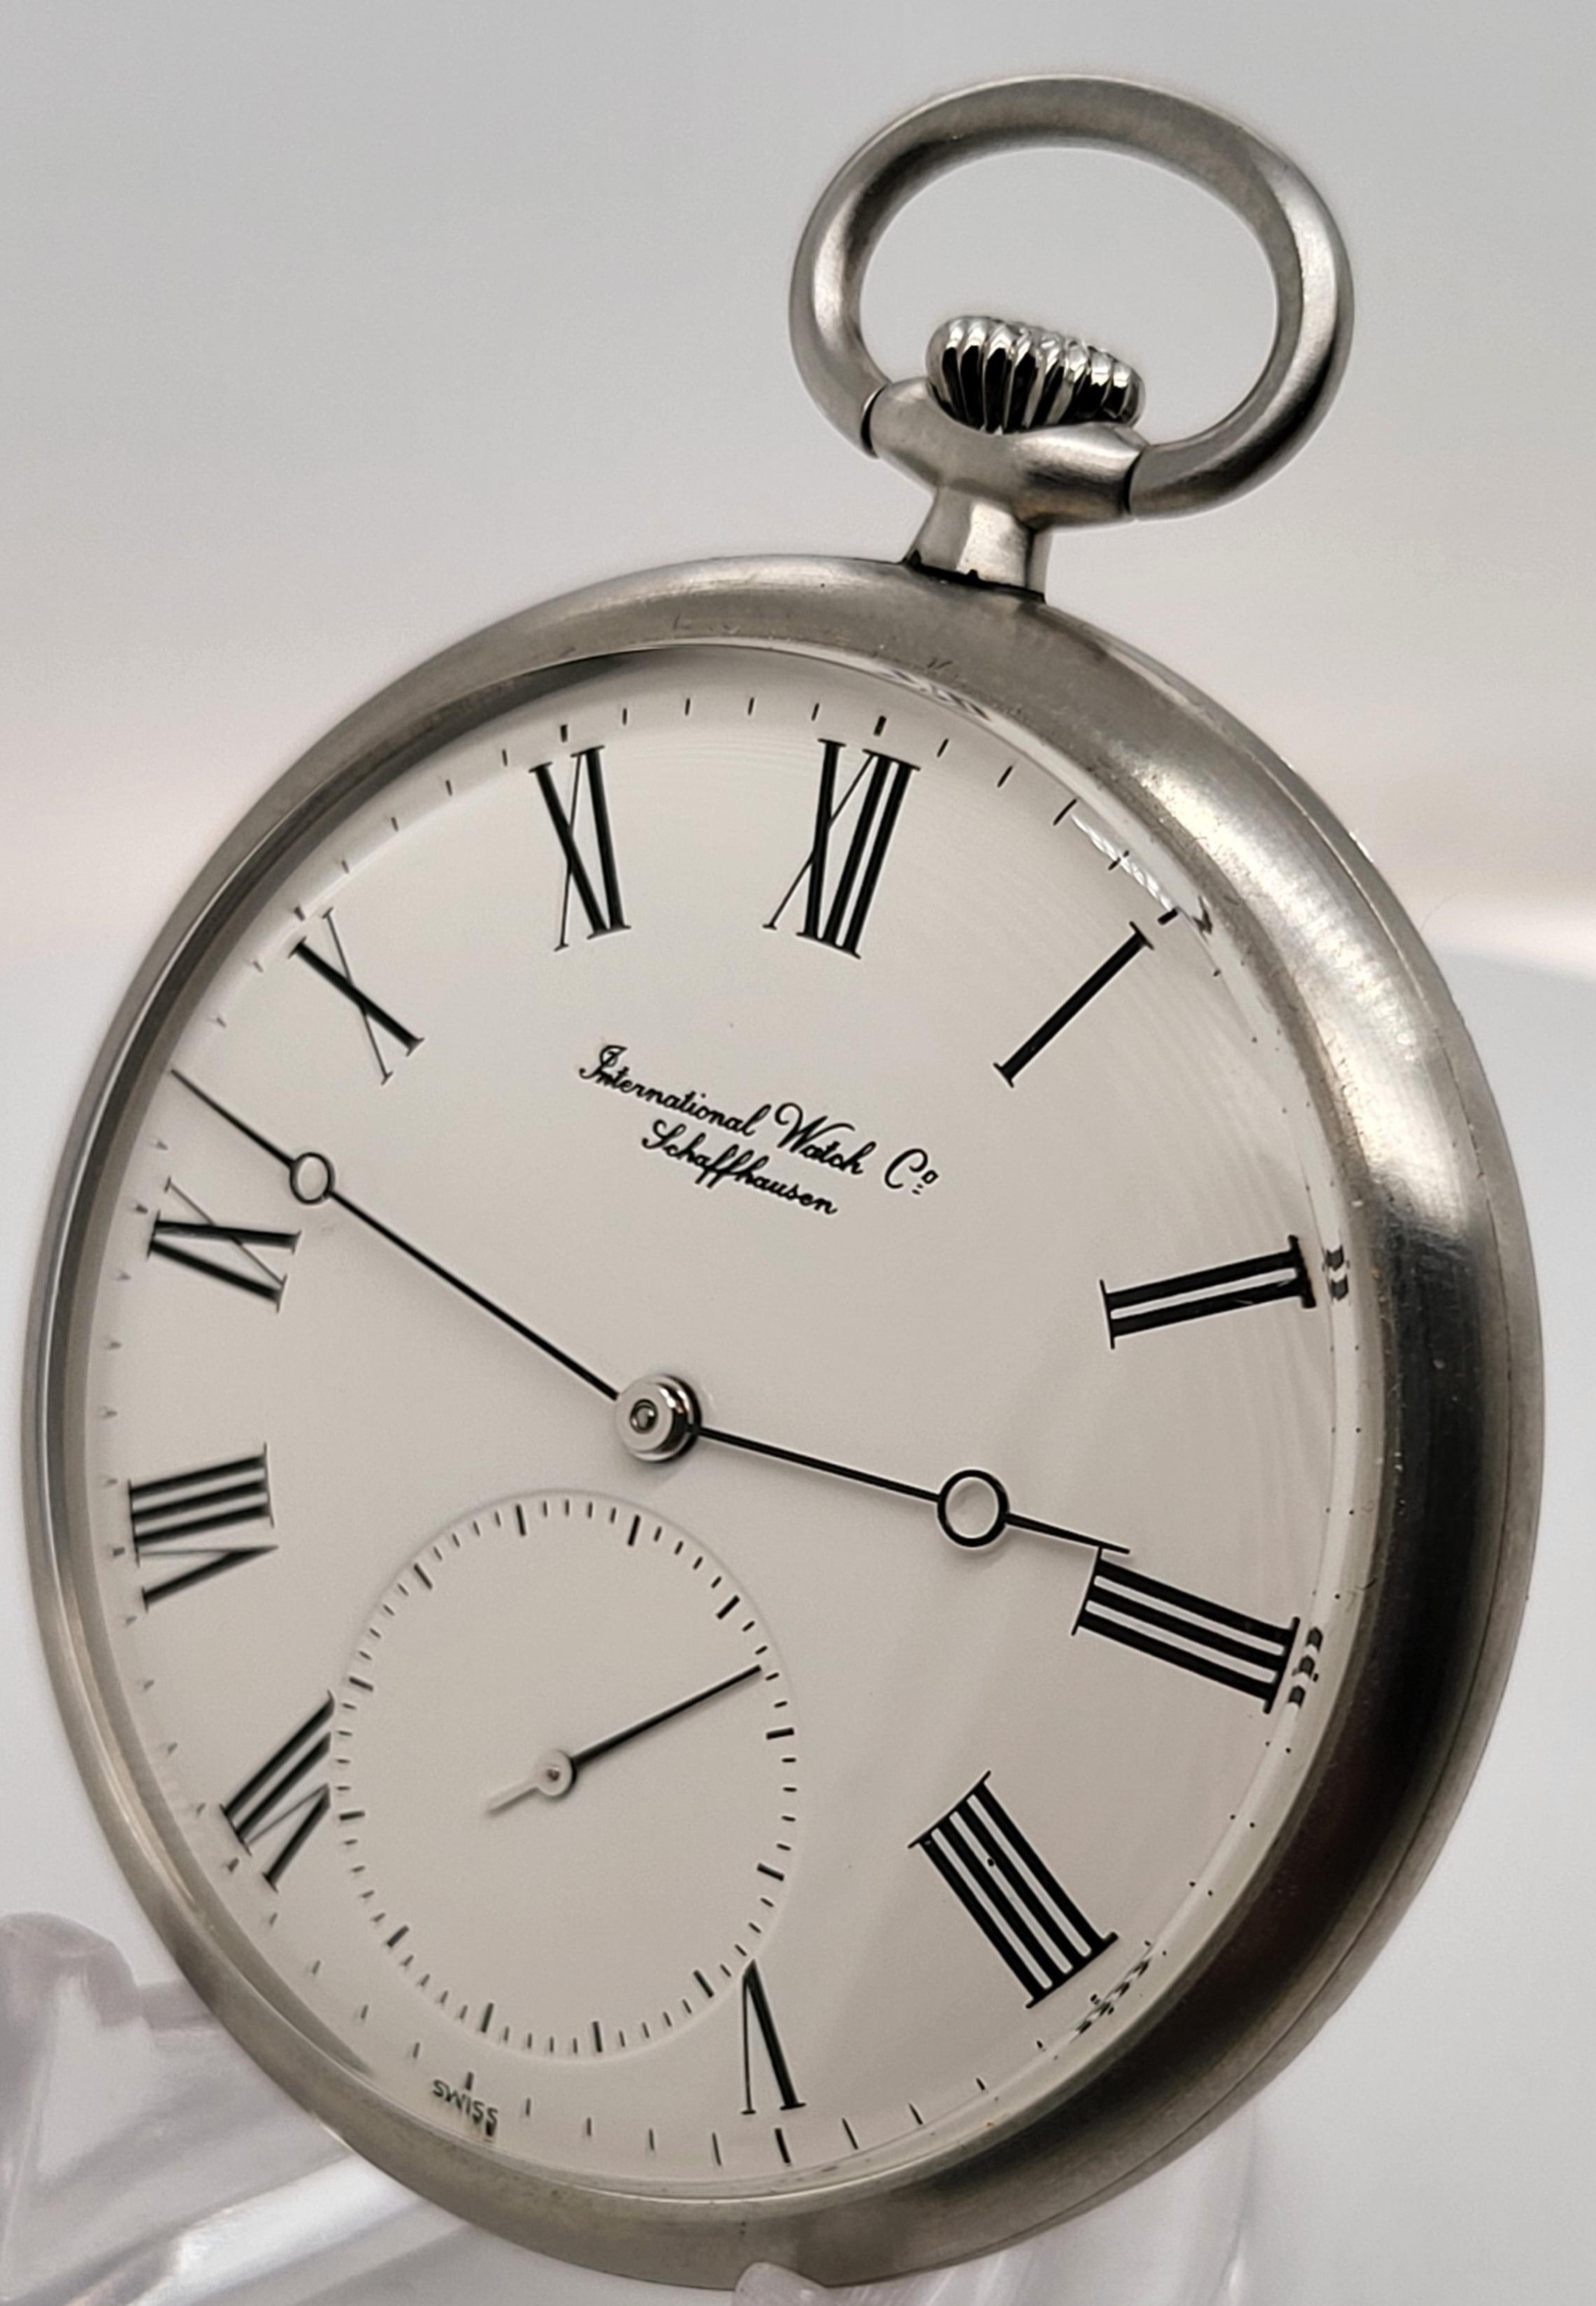 Iwc Pocket Watch Steel caliber 9720
Collectors Iwc mechanicalwith manual winding pocket watch.
In like new condition.Amazing
Movement ,extra high grade with fine swan neck regulation.